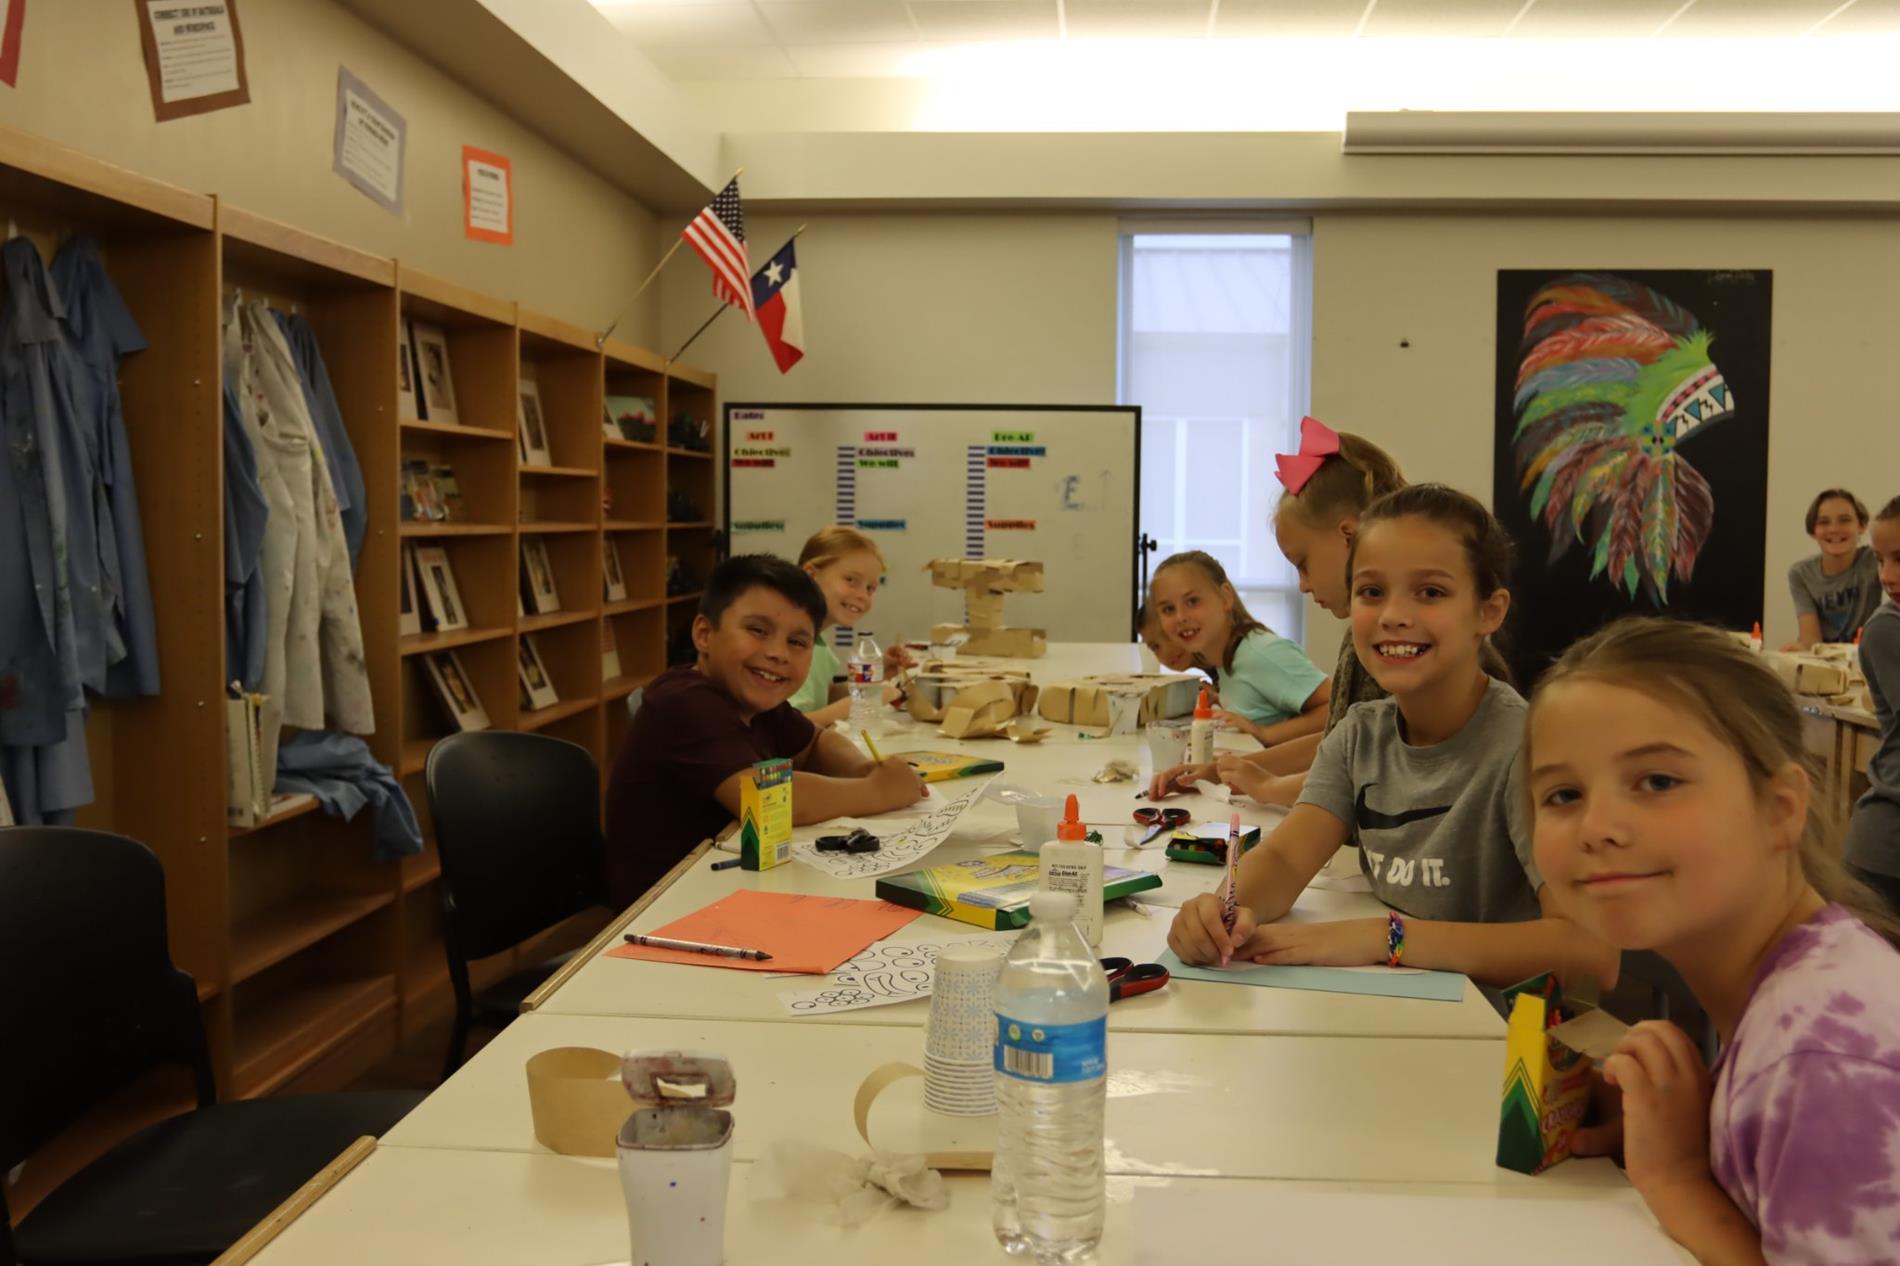 Students showing work at art camp